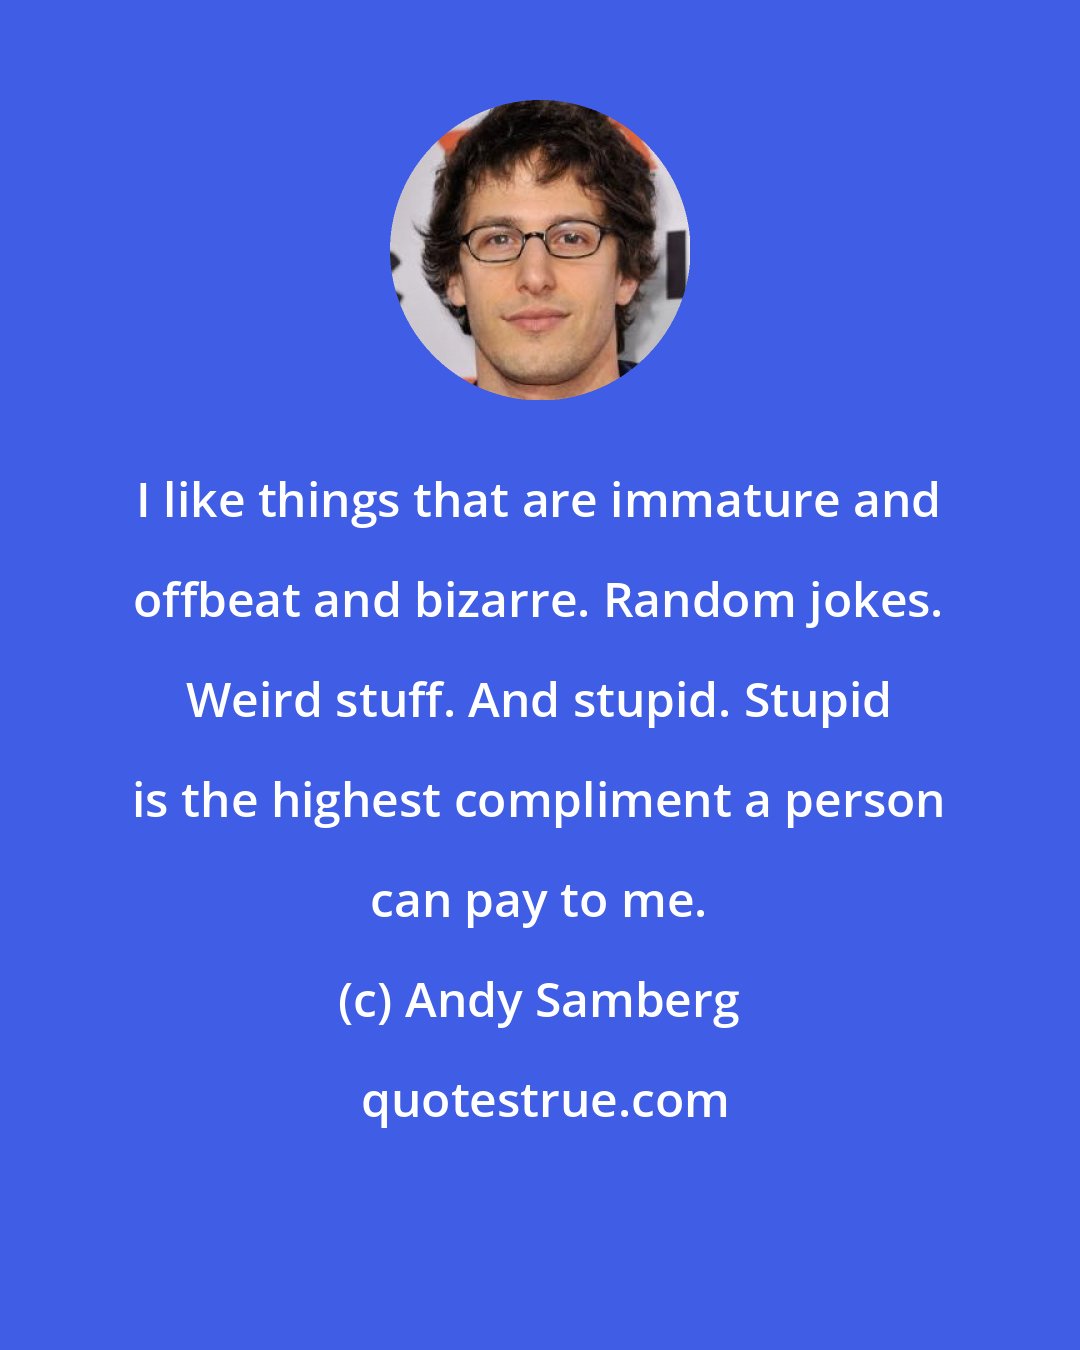 Andy Samberg: I like things that are immature and offbeat and bizarre. Random jokes. Weird stuff. And stupid. Stupid is the highest compliment a person can pay to me.